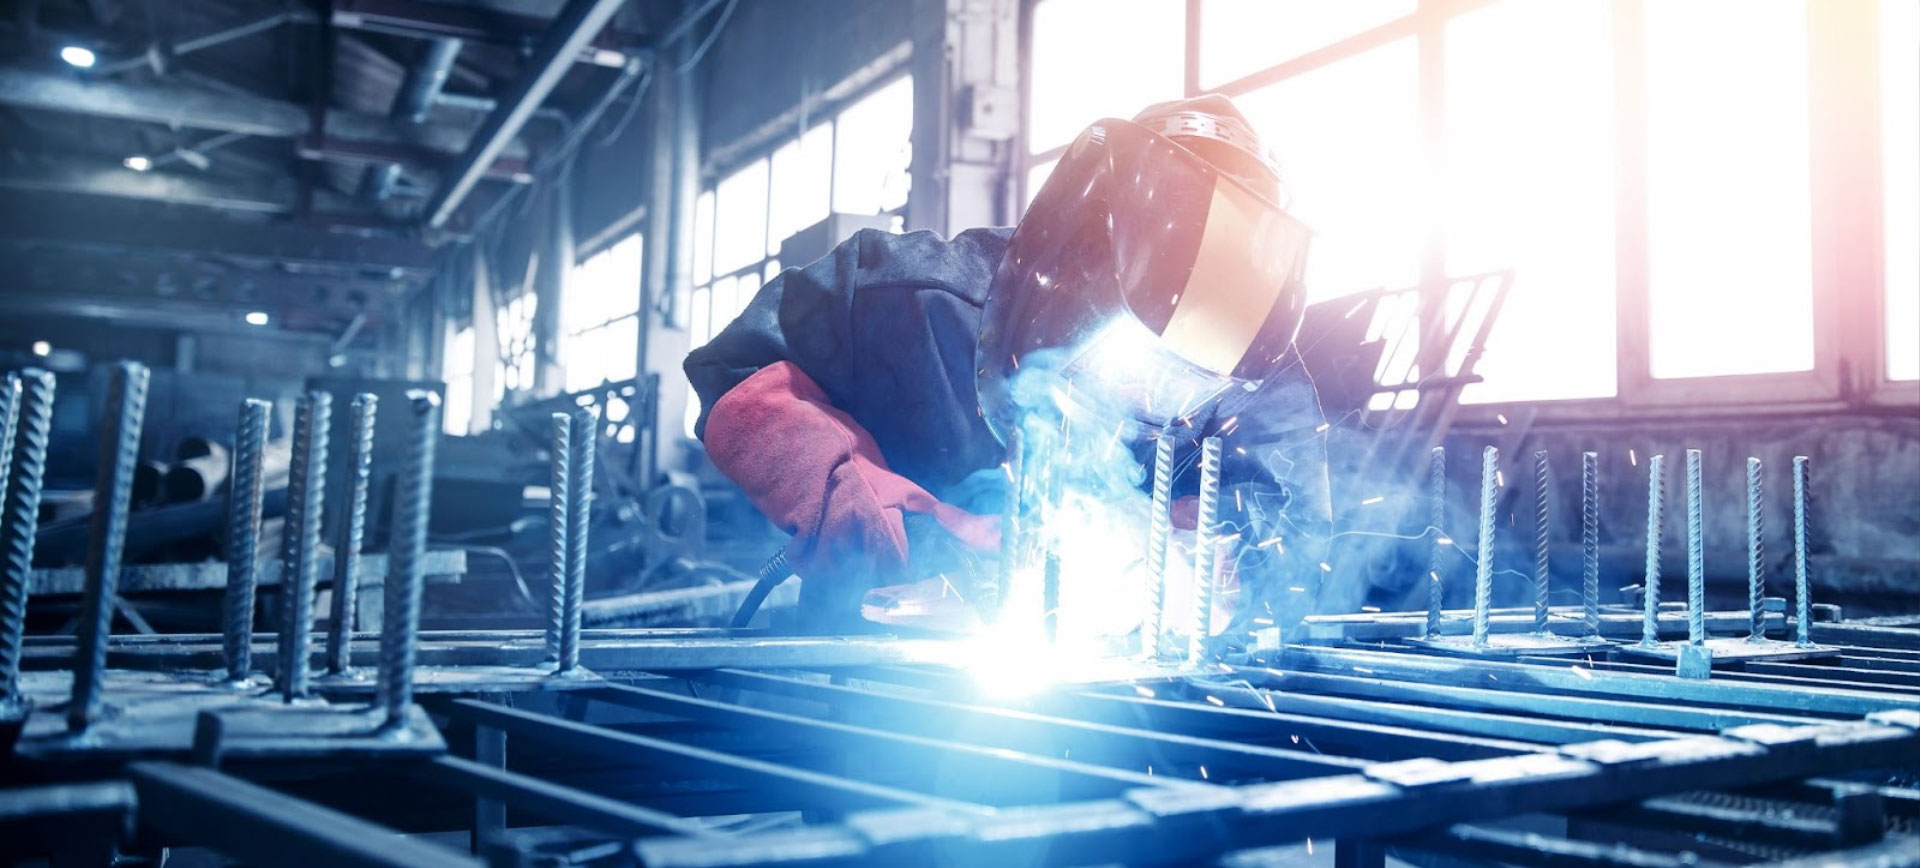 Hamilton-area women can learn welding skills for free at the upcoming workshop